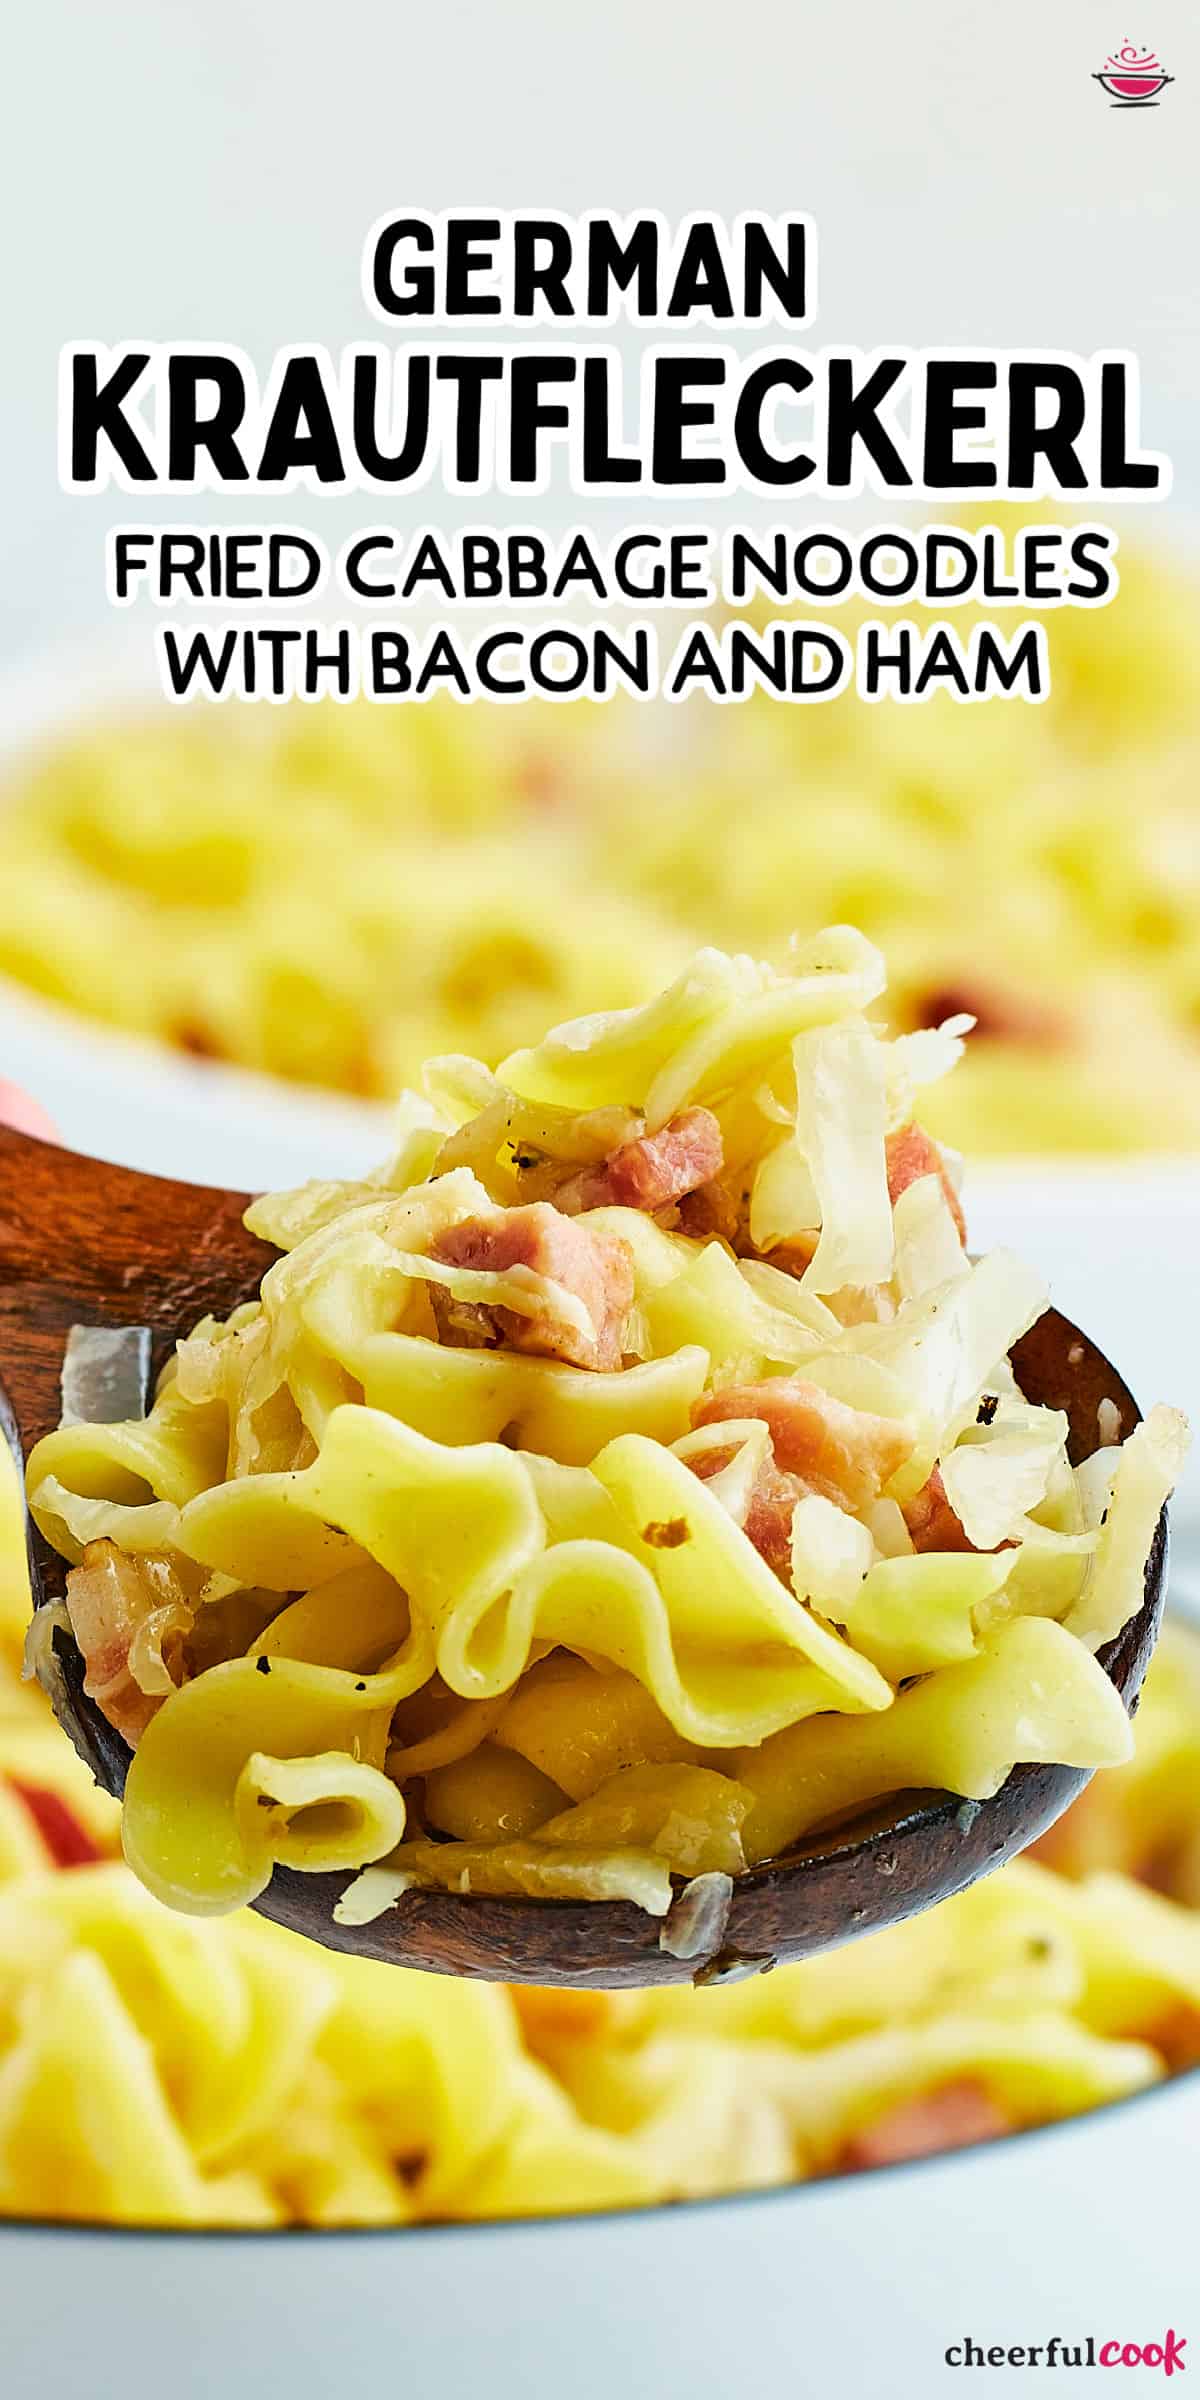 Krautfleckerl is the most delicious comfort food. Made with ham, bacon, fried onions, cabbage, and egg noodles you need for a quick and super satisfying dinner. #cheerfulcook #germanfood #cabbage #bacon ♡ cheerfulcook.com via @cheerfulcook